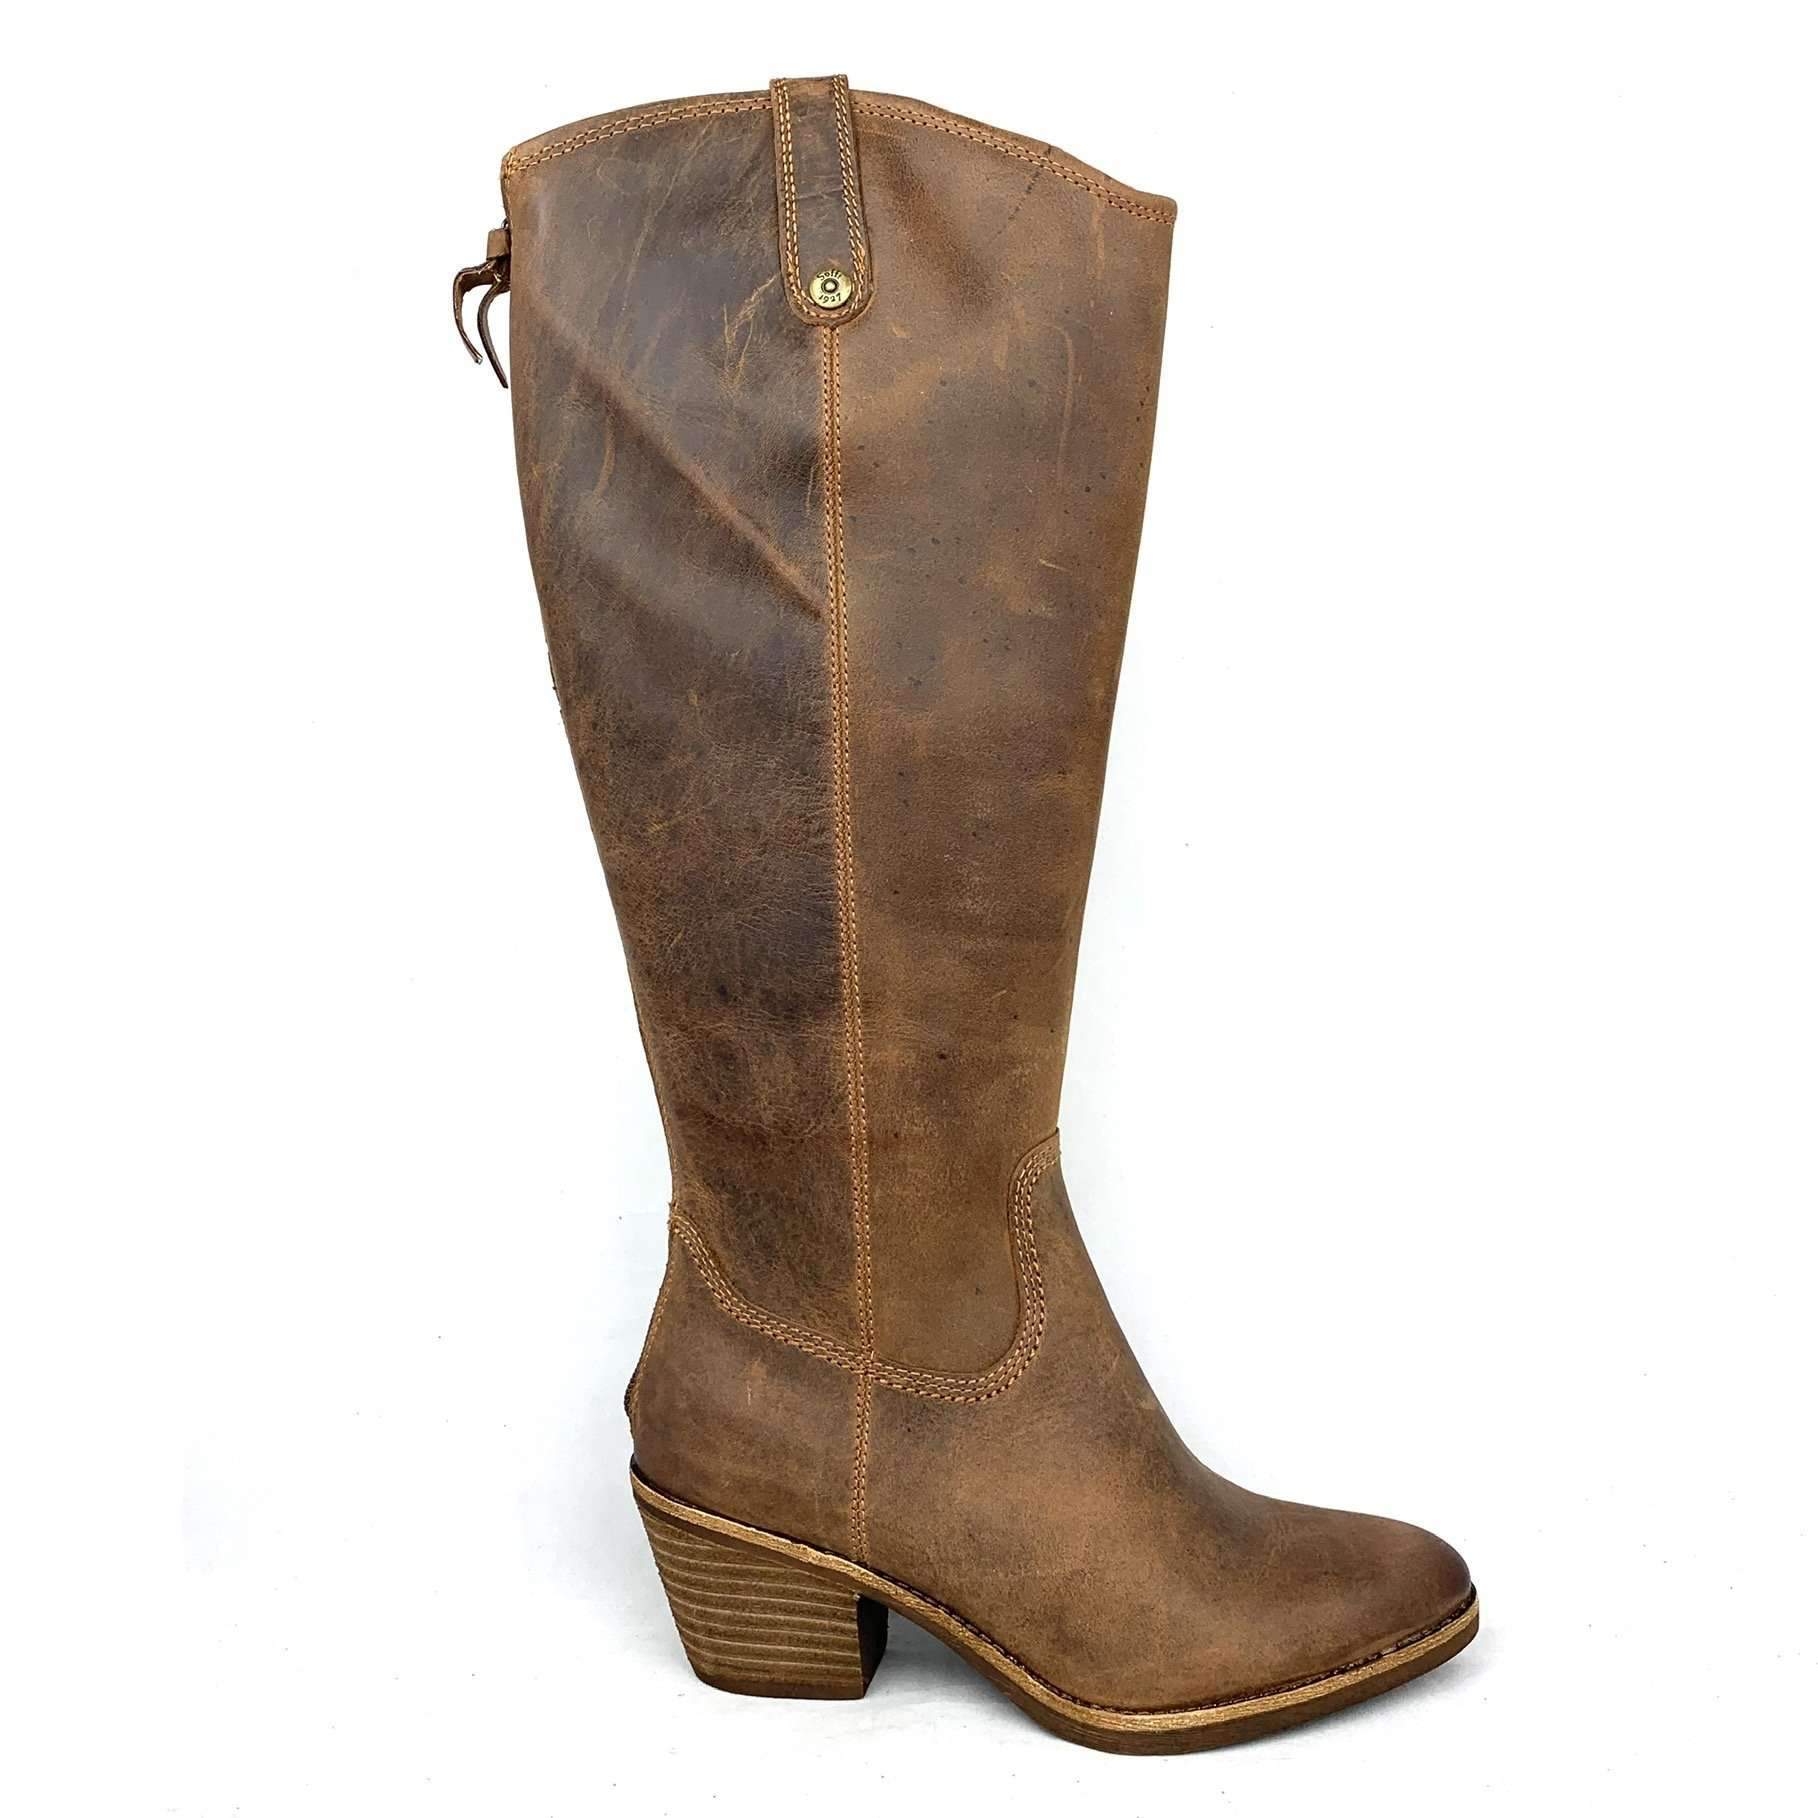 [Sofft - Artmore Tall Western Boot], [Clearance], [Sofft], [Plum Bottom].